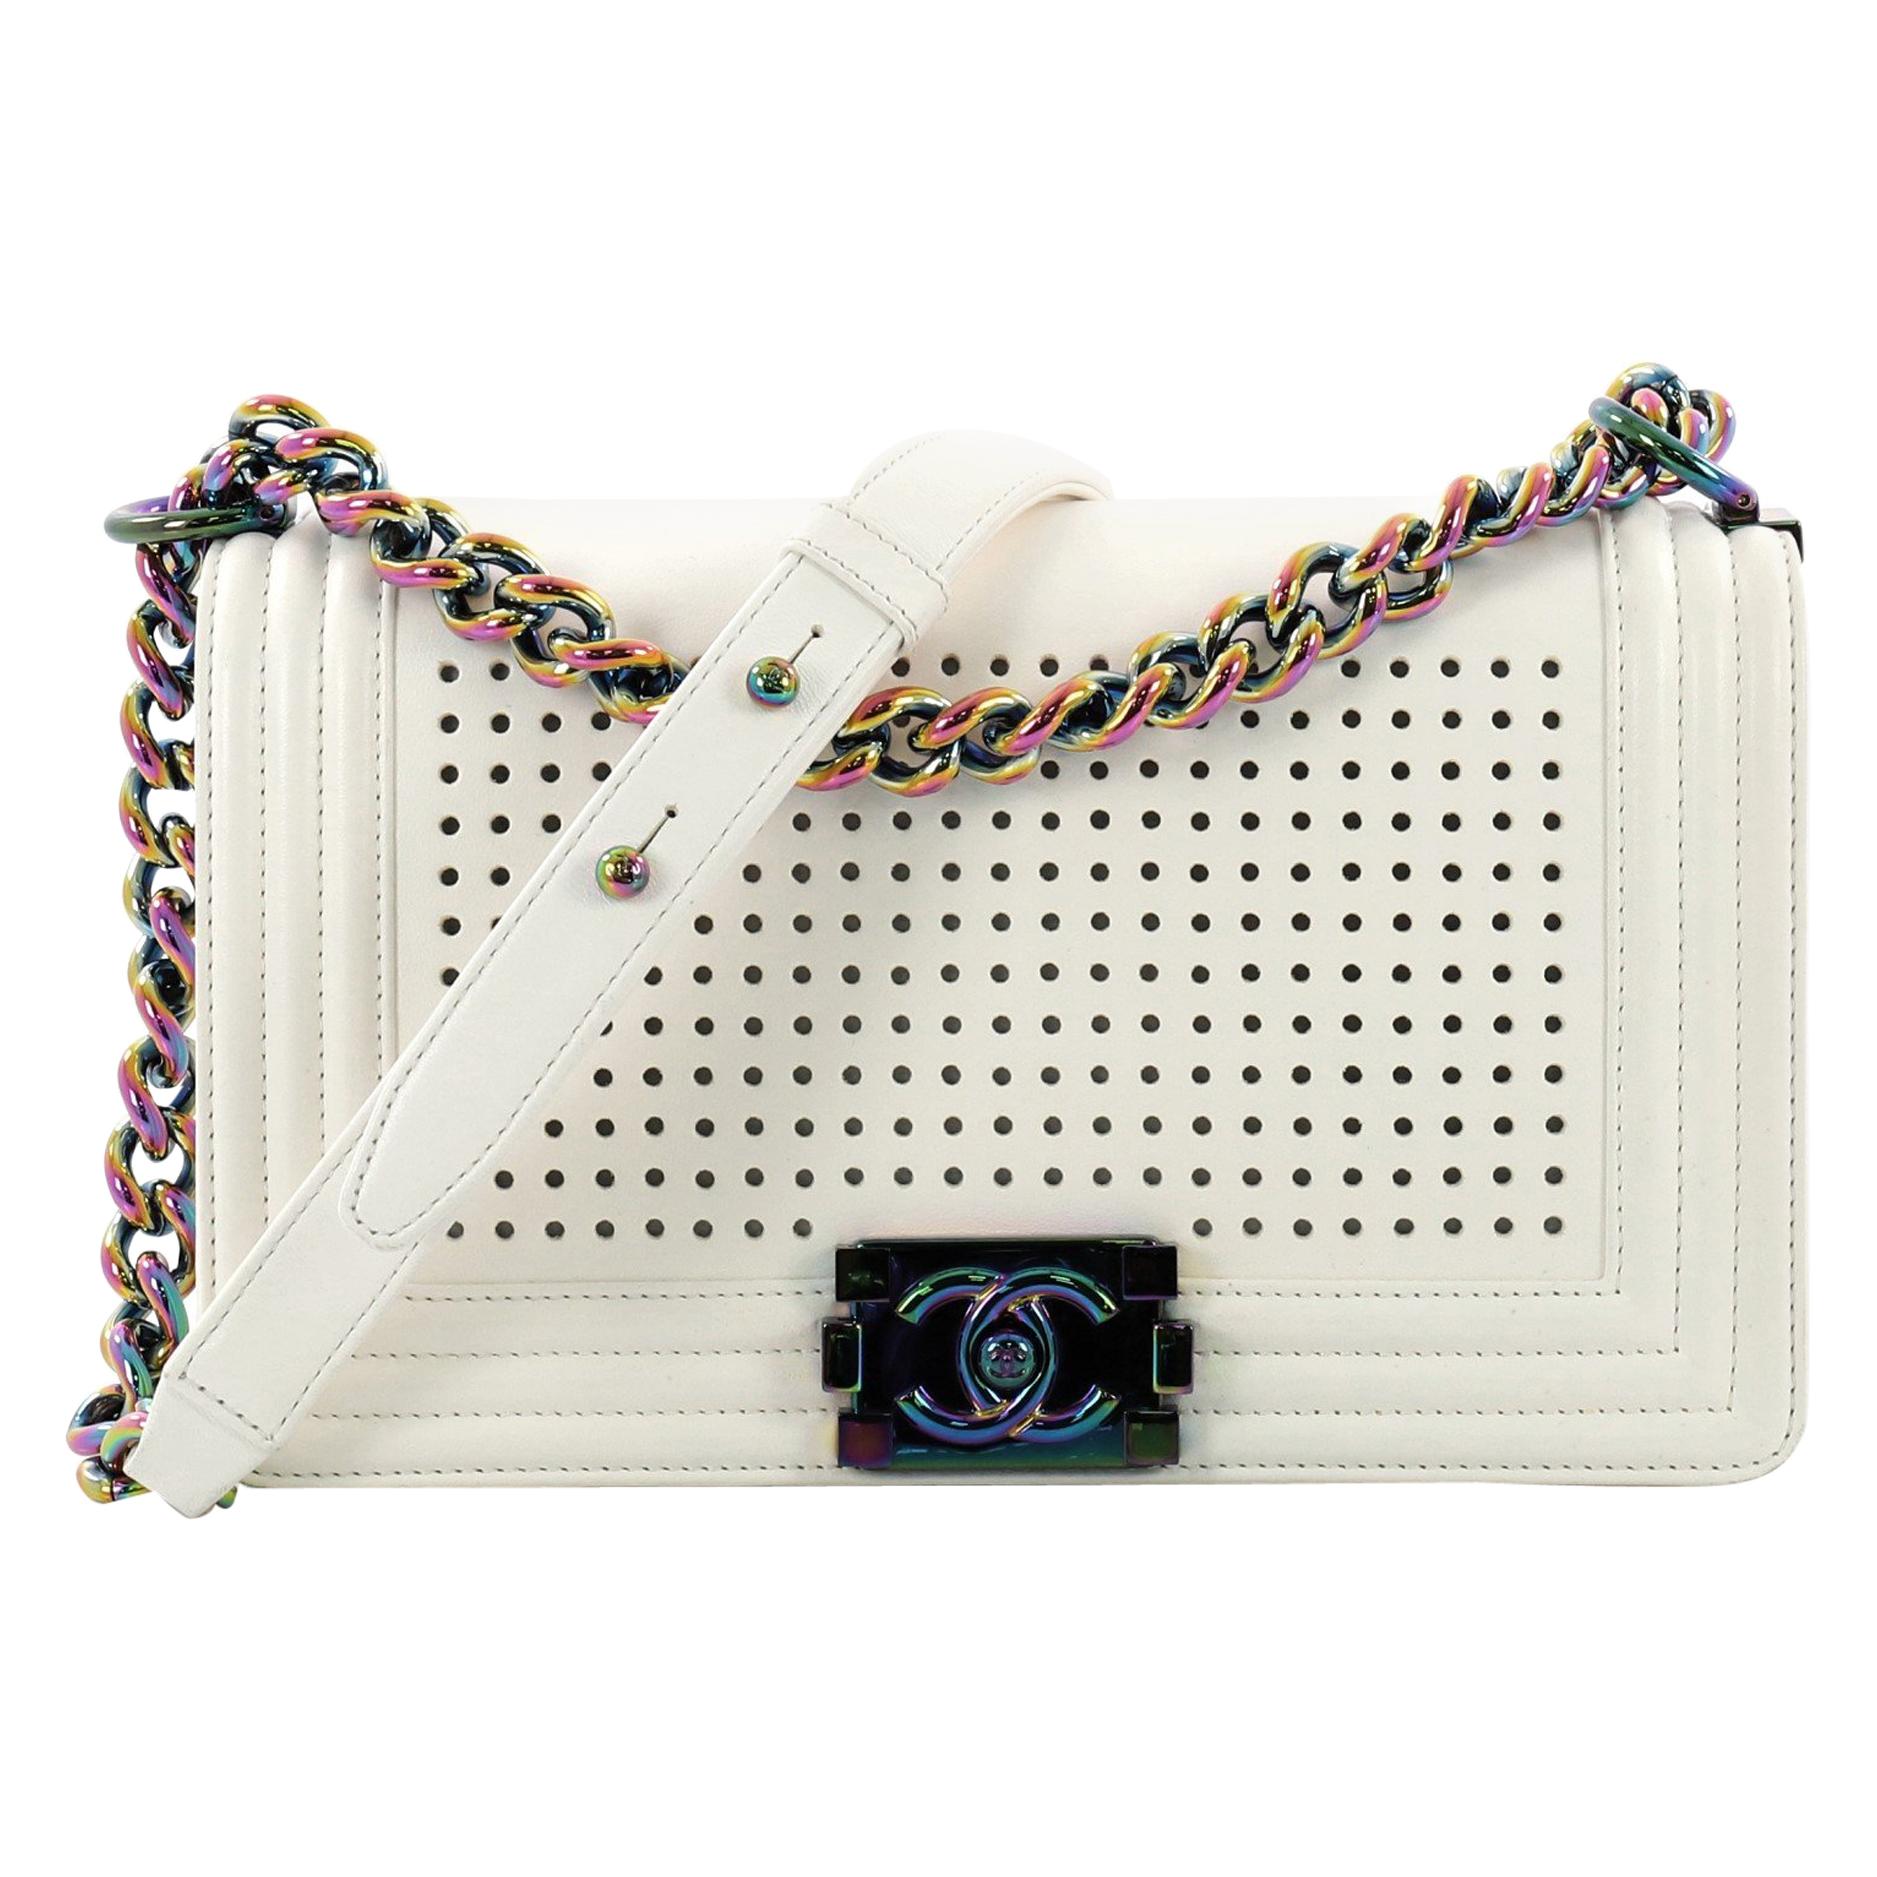 Chanel Boy Flap Bag LED Perforated Leather Small